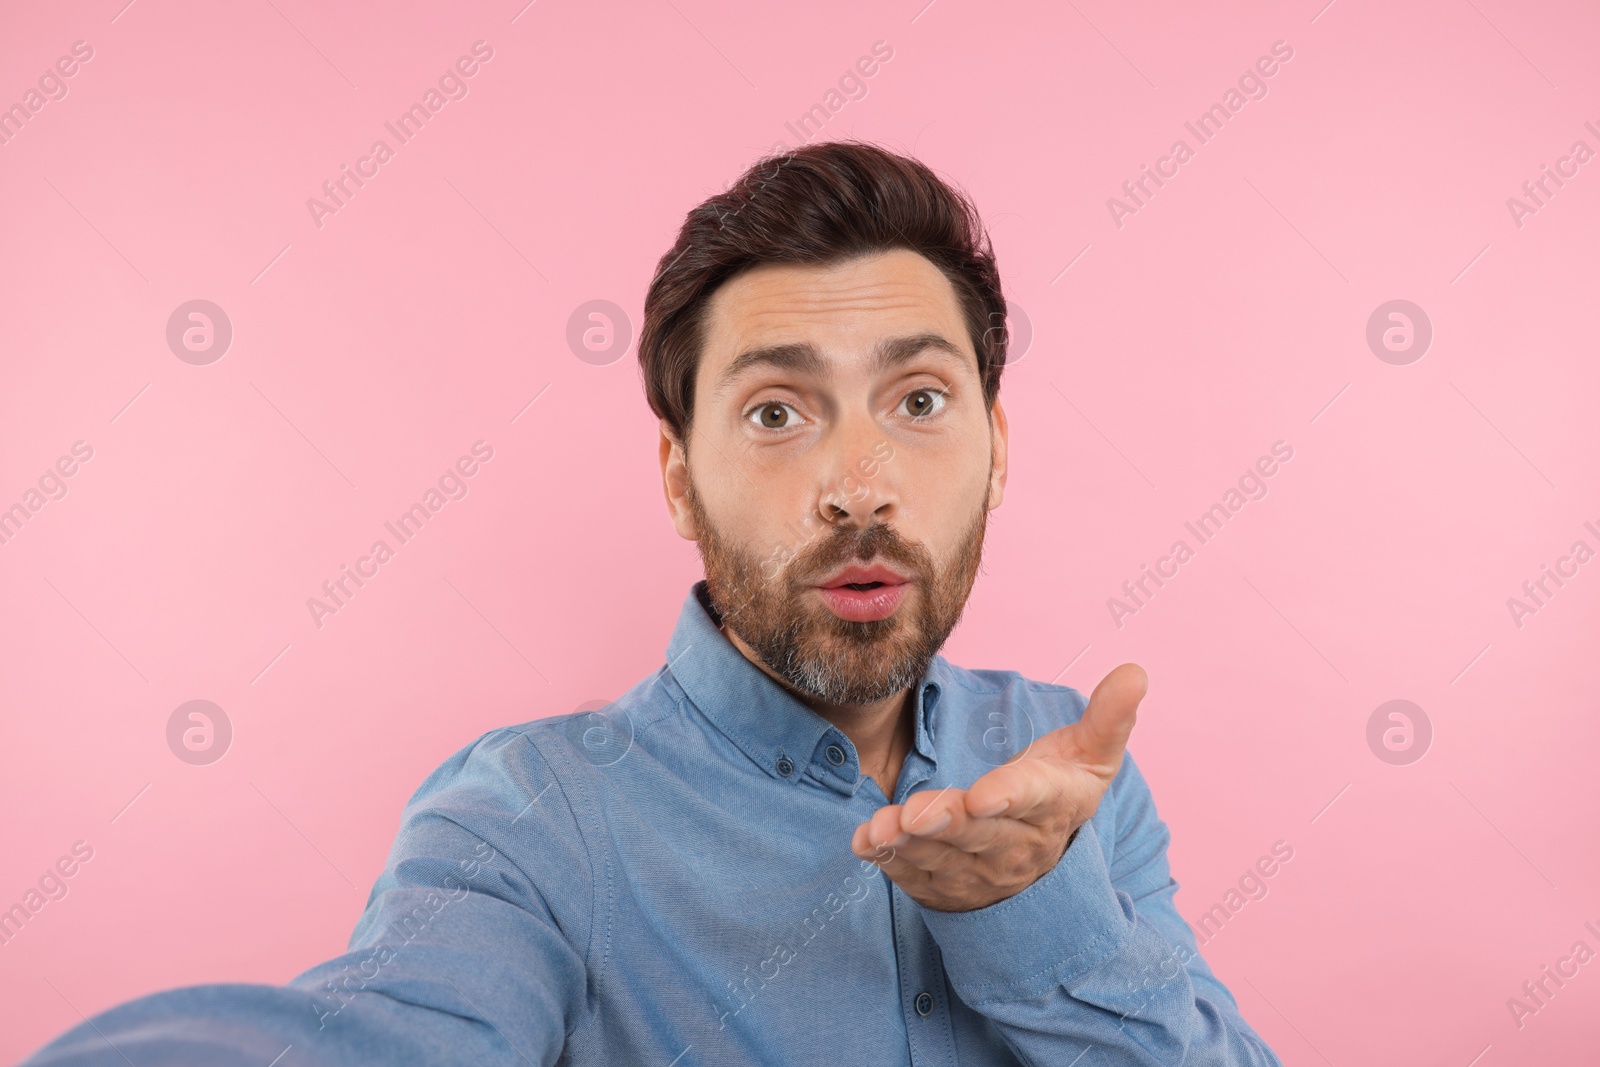 Photo of Man taking selfie and blowing kiss on pink background